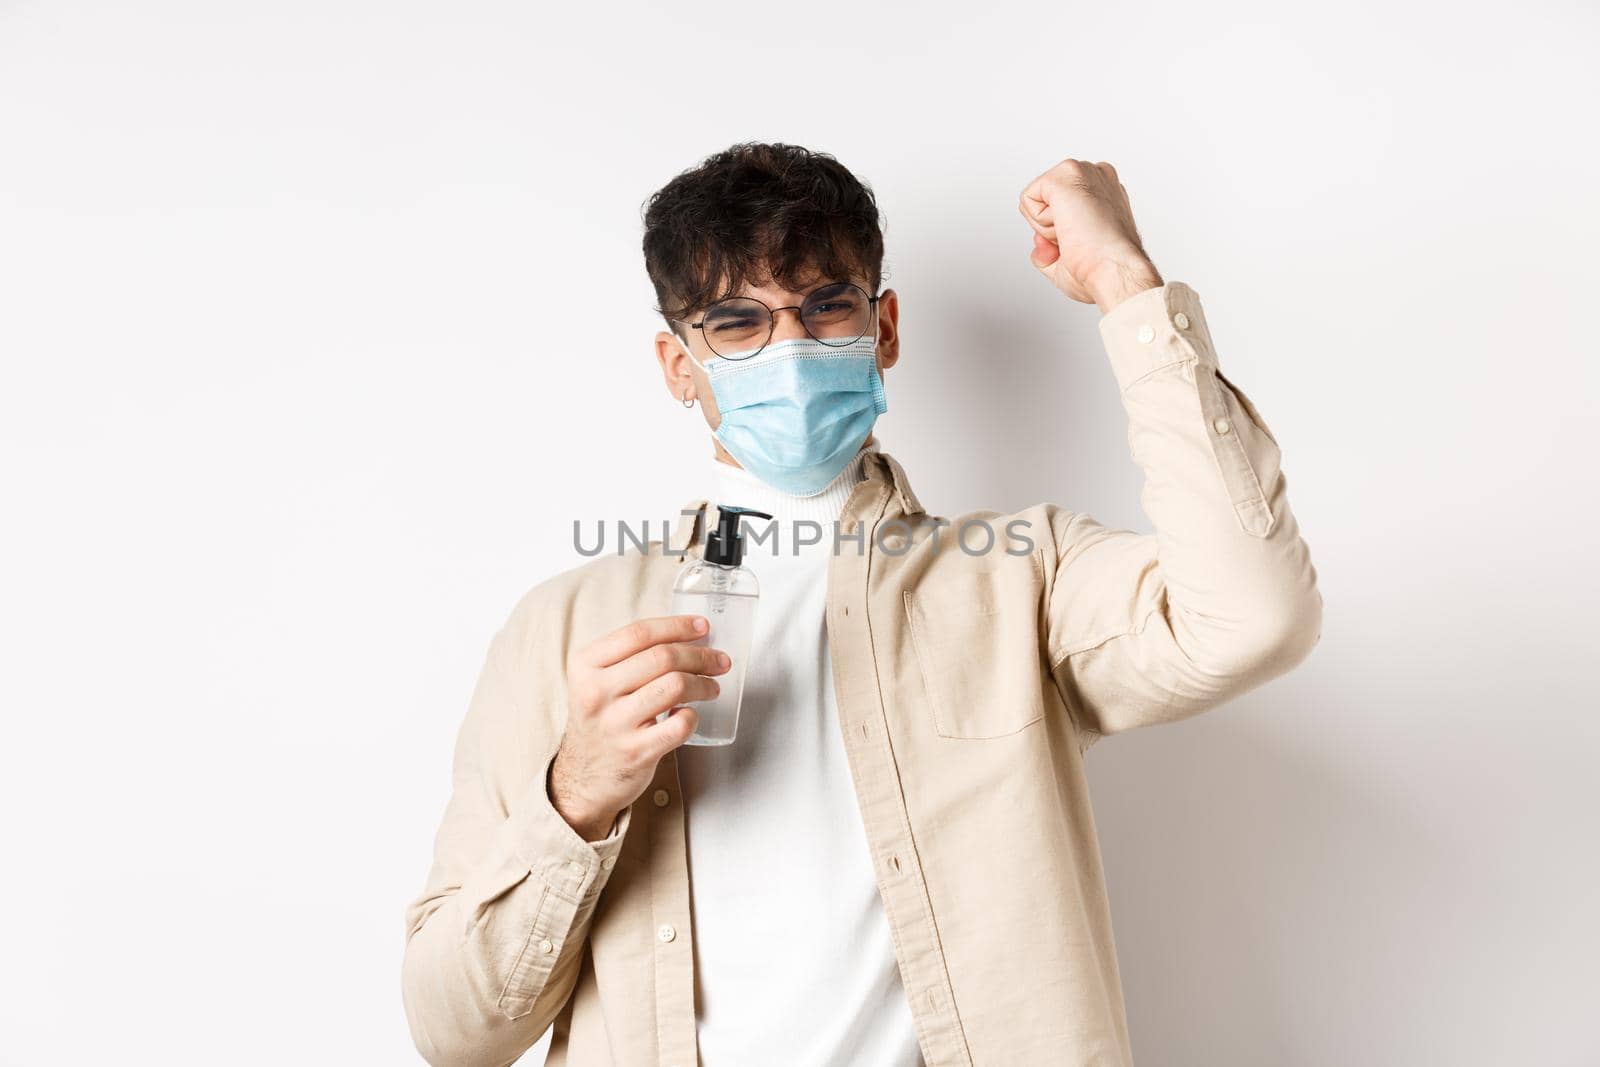 Health, covid and quarantine concept. Happy young man motivated to fight coronavirus, showing hand sanitizer and raising hand up in triumph, standing on white background.